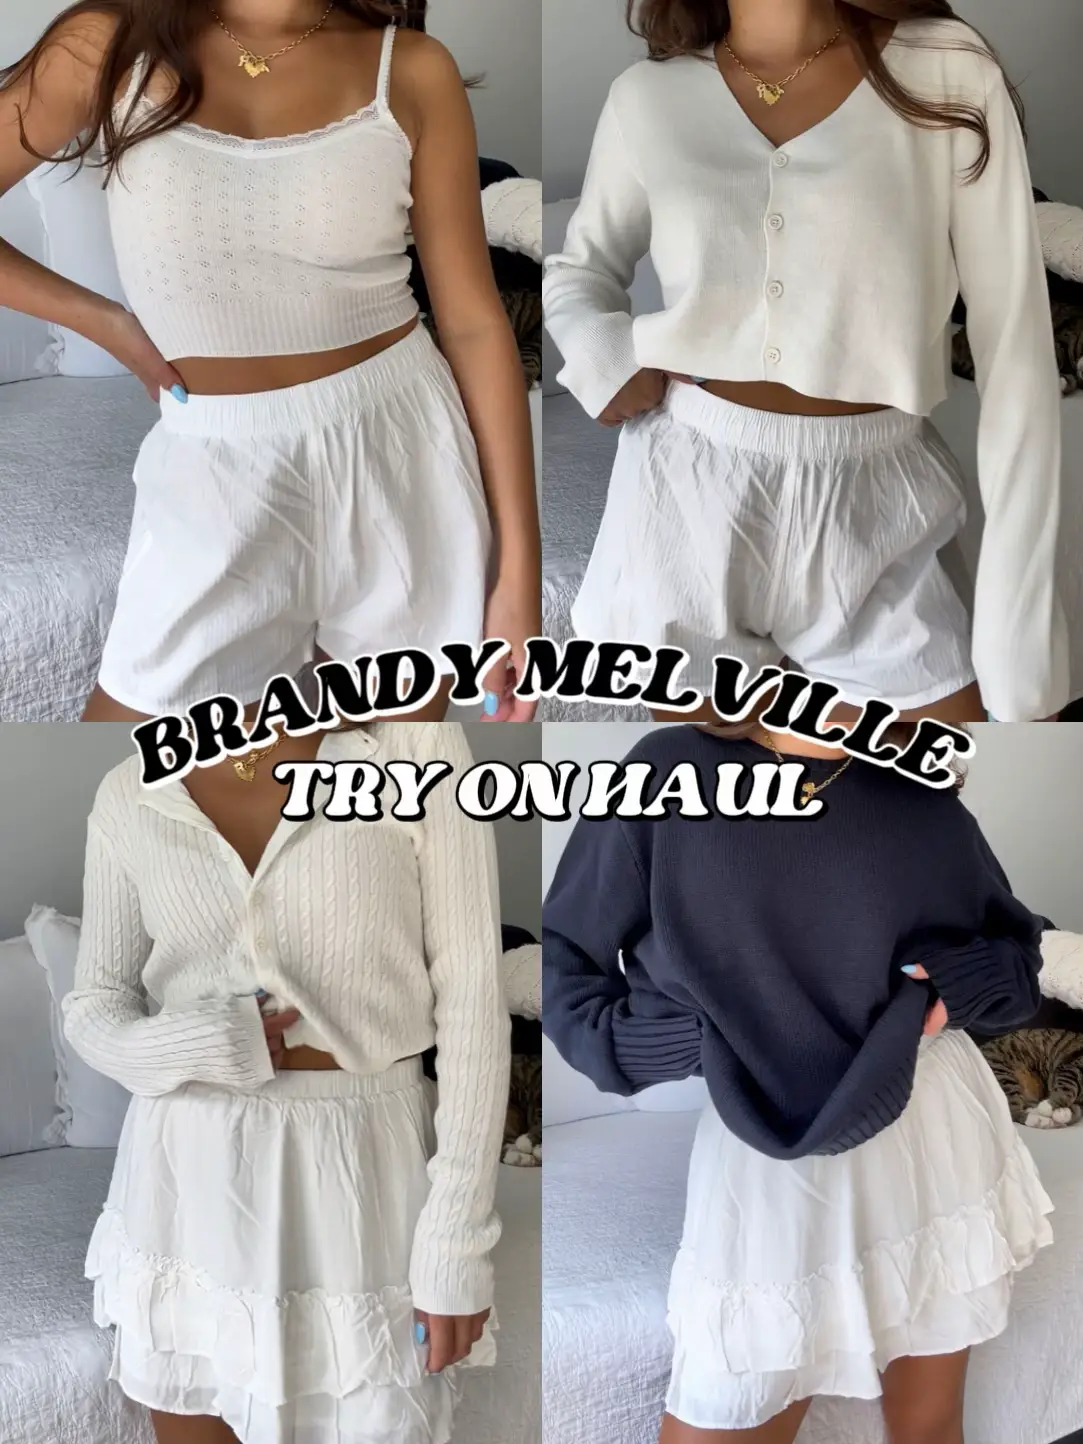 BRANDY MELVILLE TRY ON HAUL, Gallery posted by riannagail